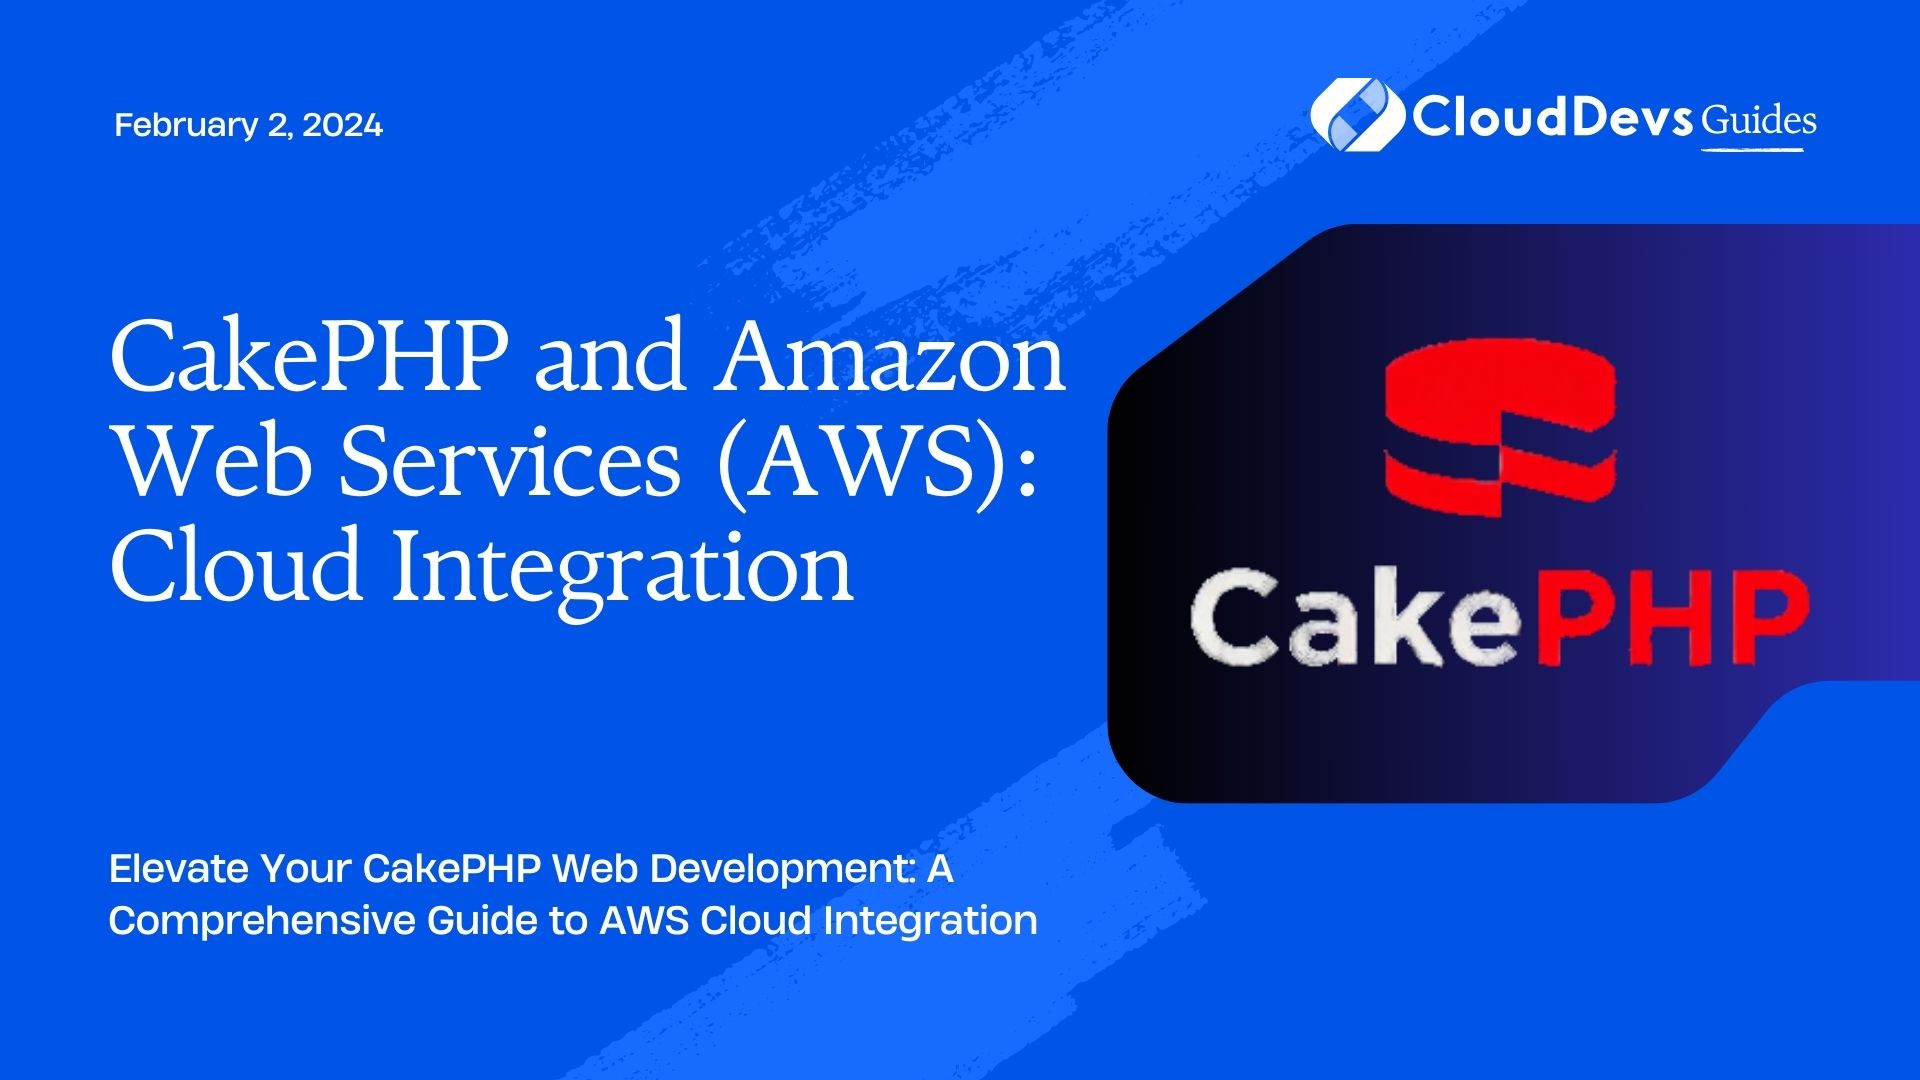 CakePHP and Amazon Web Services (AWS): Cloud Integration